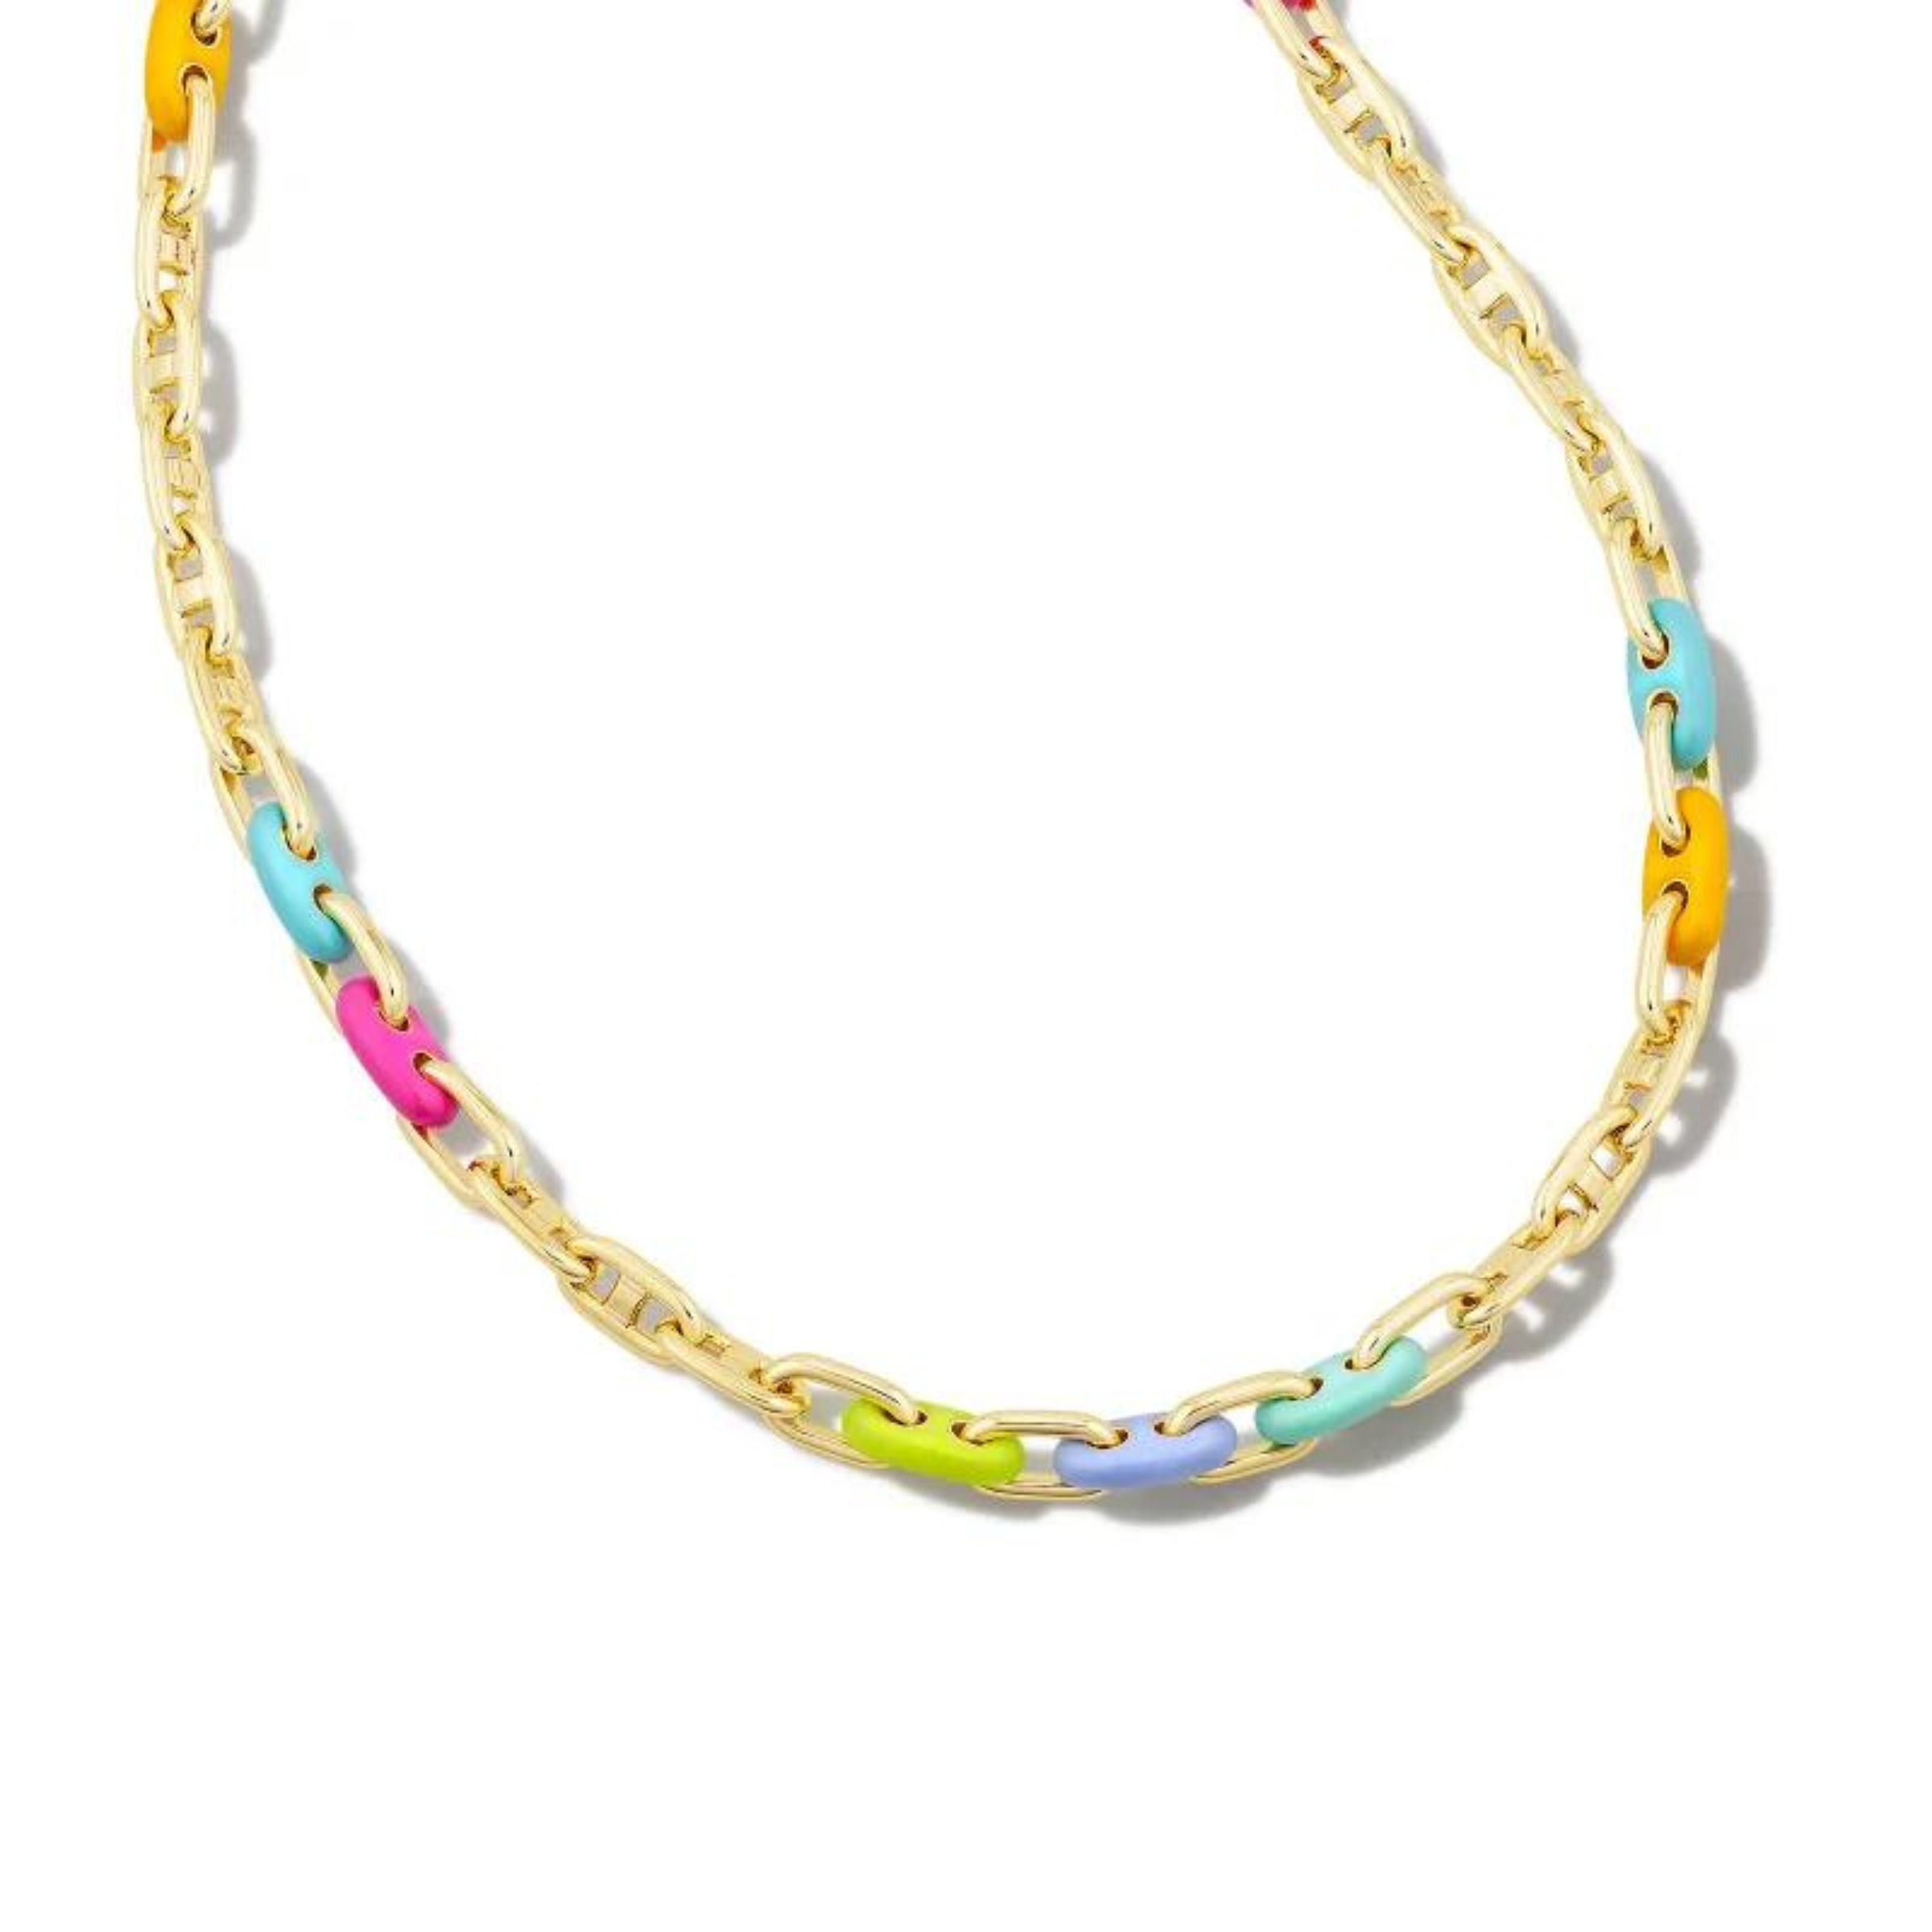 Kendra Scott | Bailey Gold Chain Necklace in Rainbow Multi Mix - Giddy Up Glamour Boutique